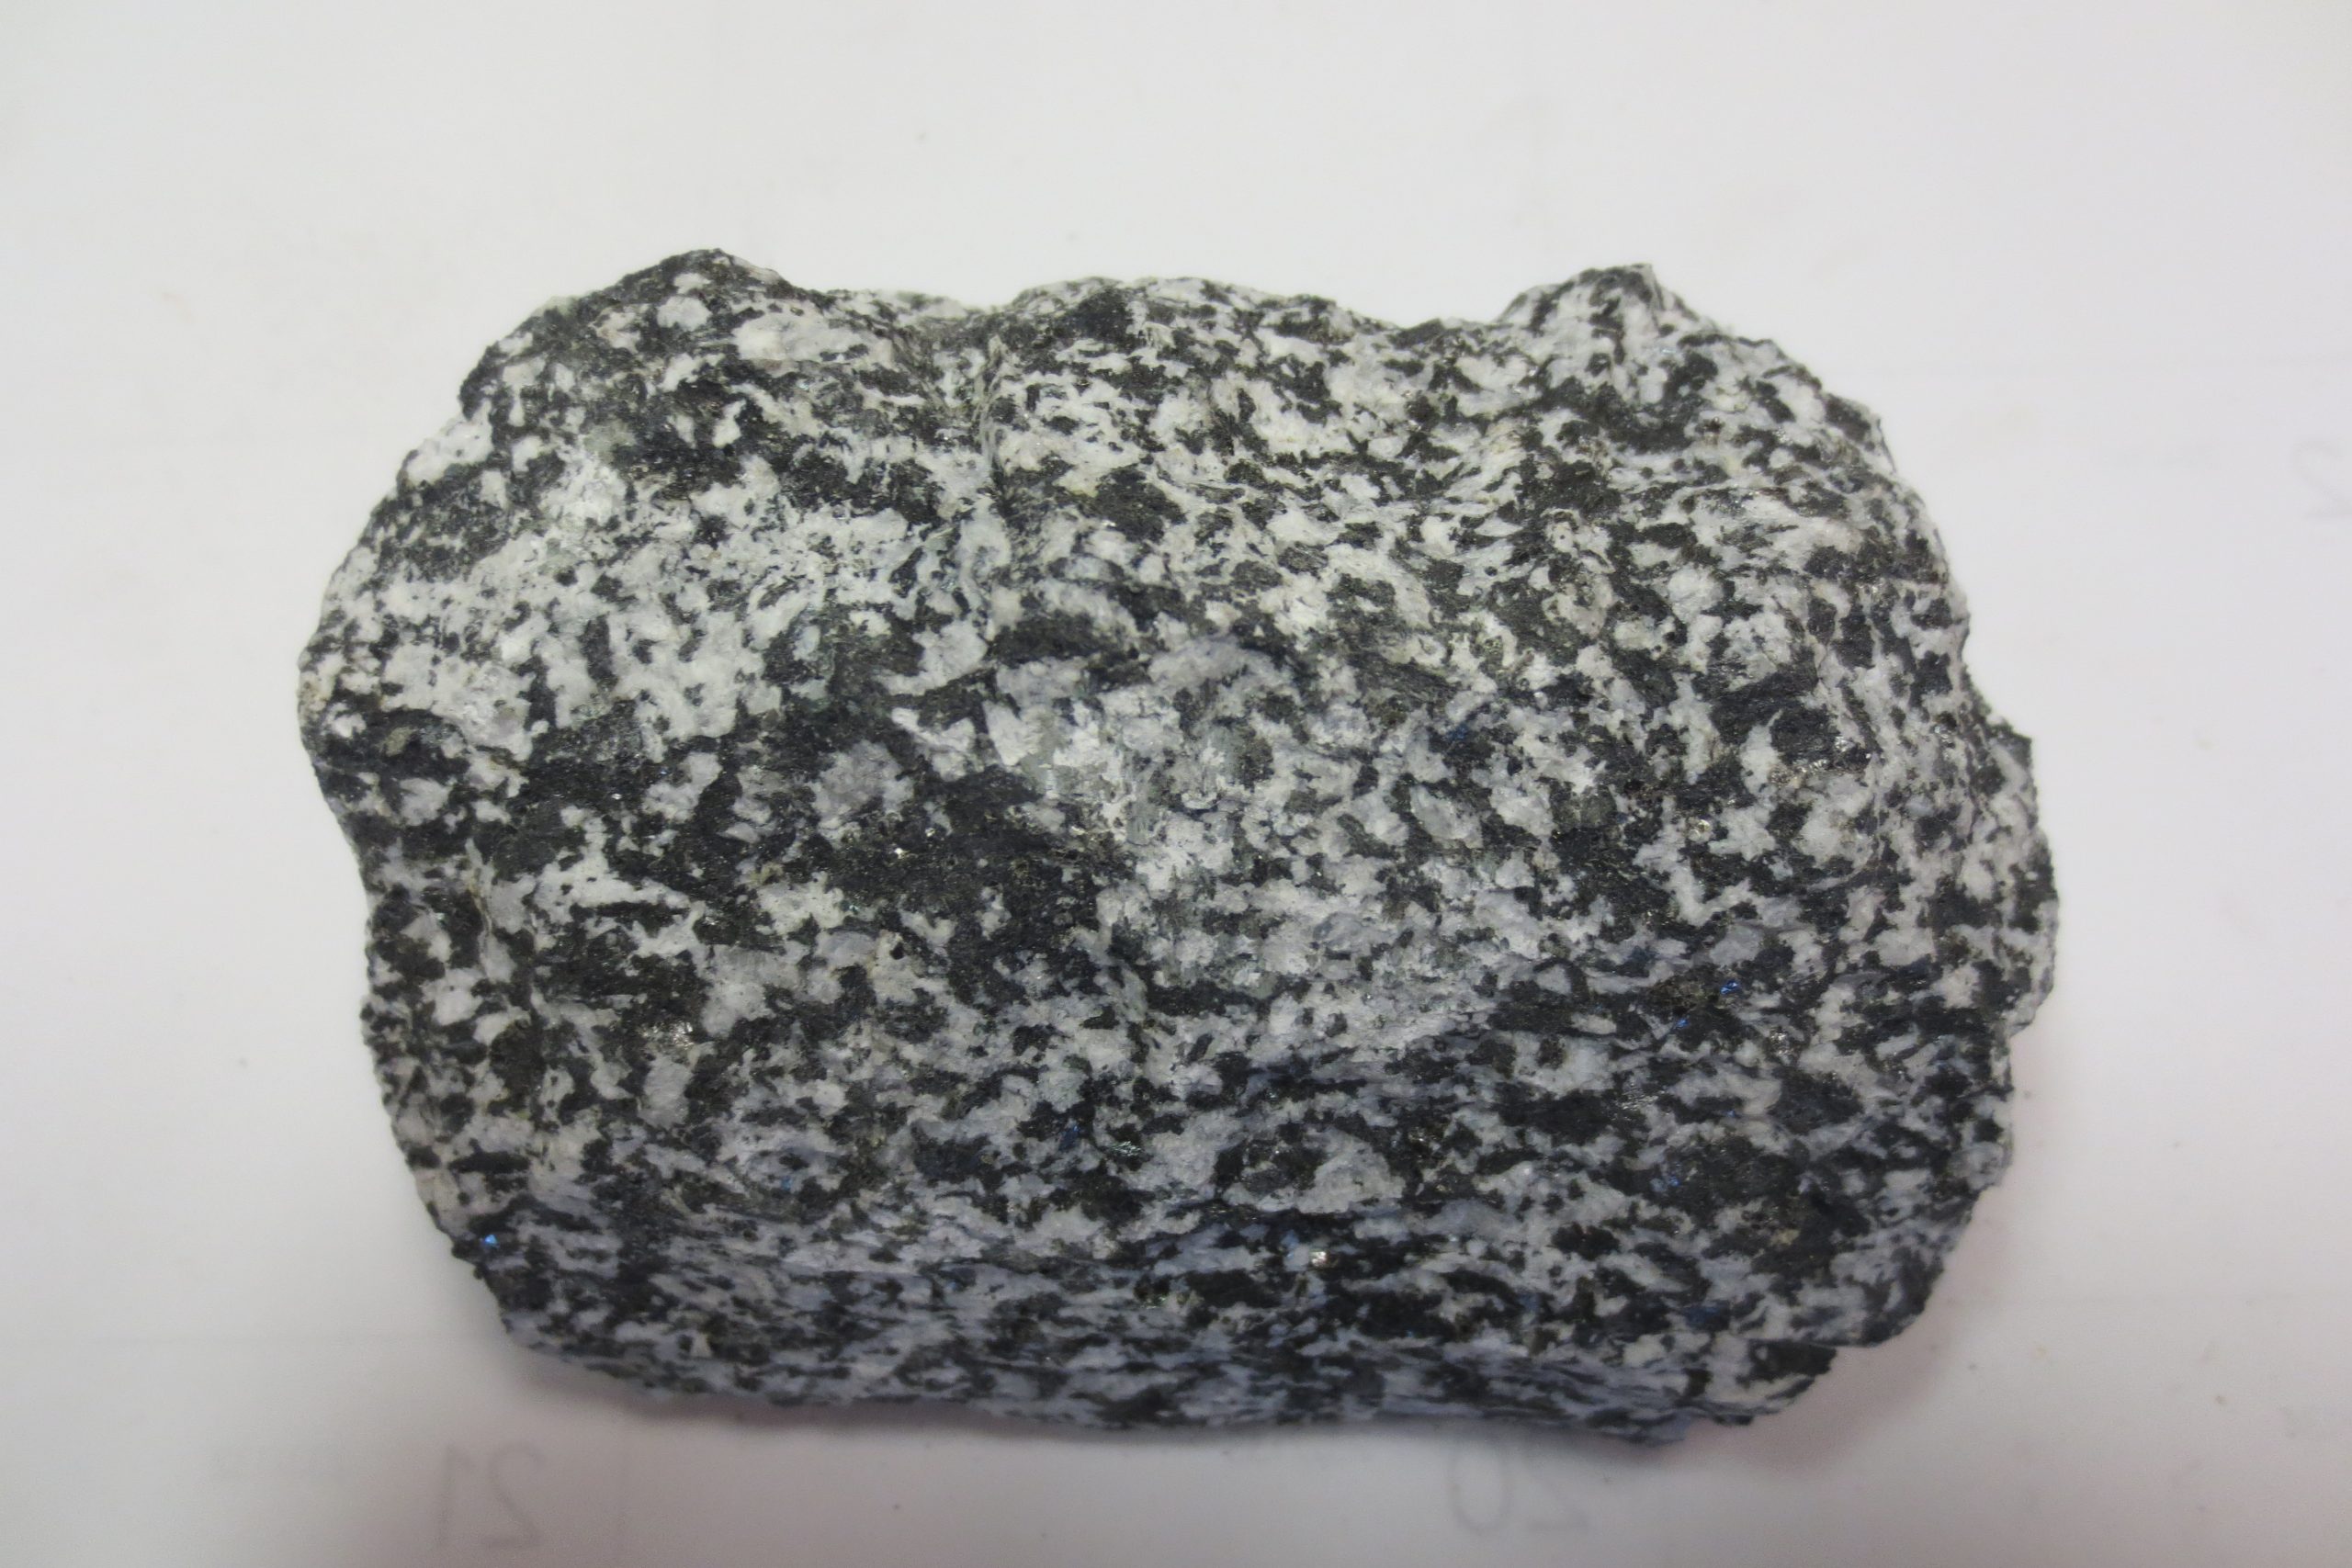 Solid, opaque, roughly rectangular, rough sided rock with specs of black and gray particles